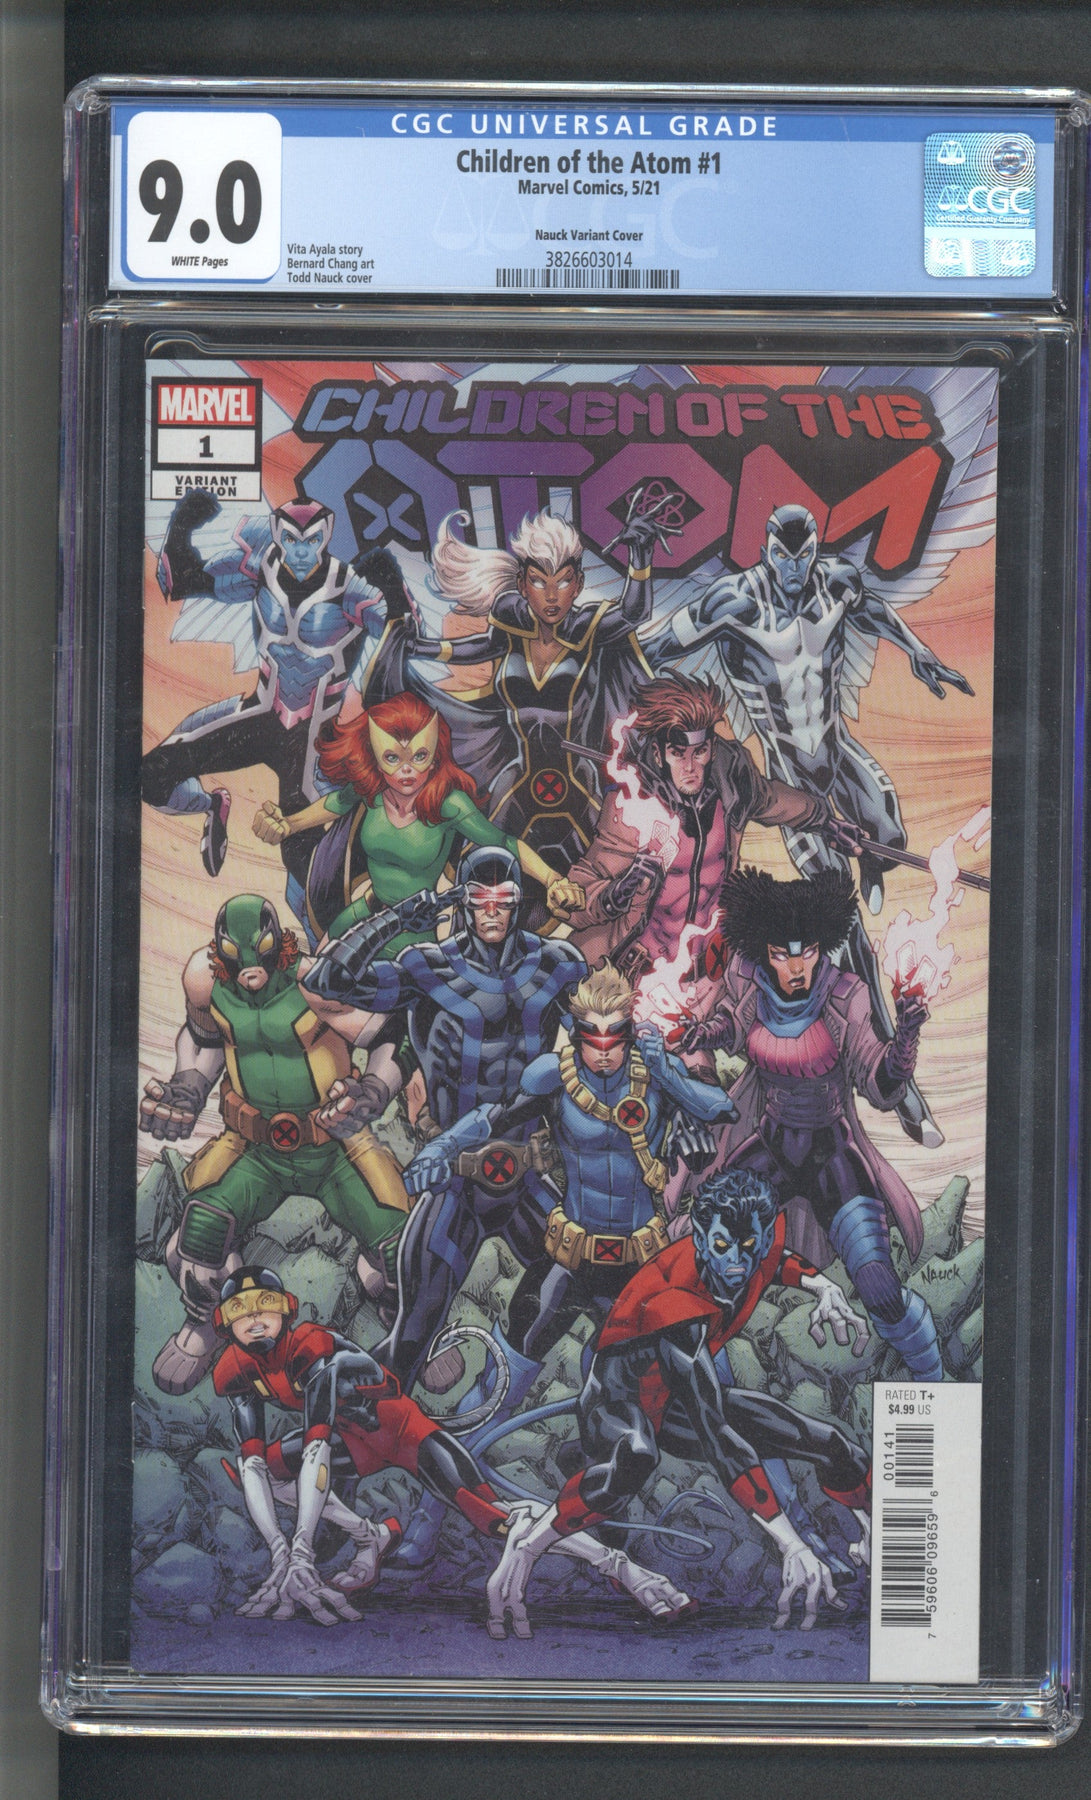 CAPTAIN MARVEL #2 CGC 9.0 WHITE PAGES